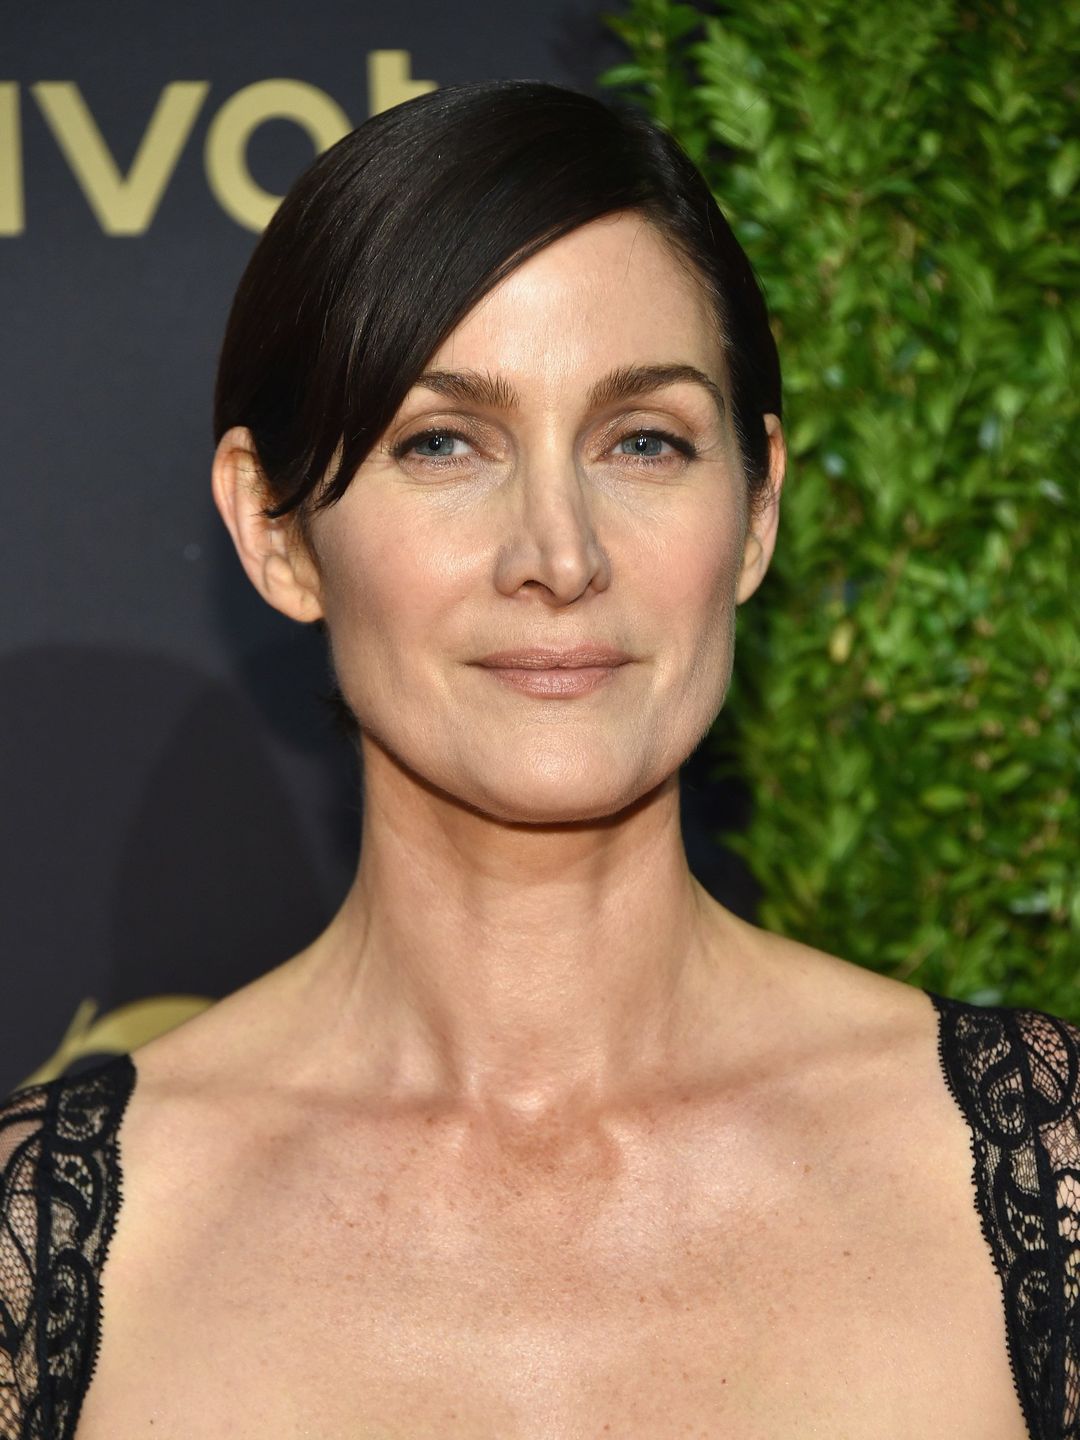 Carrie-Anne Moss does she have a husband